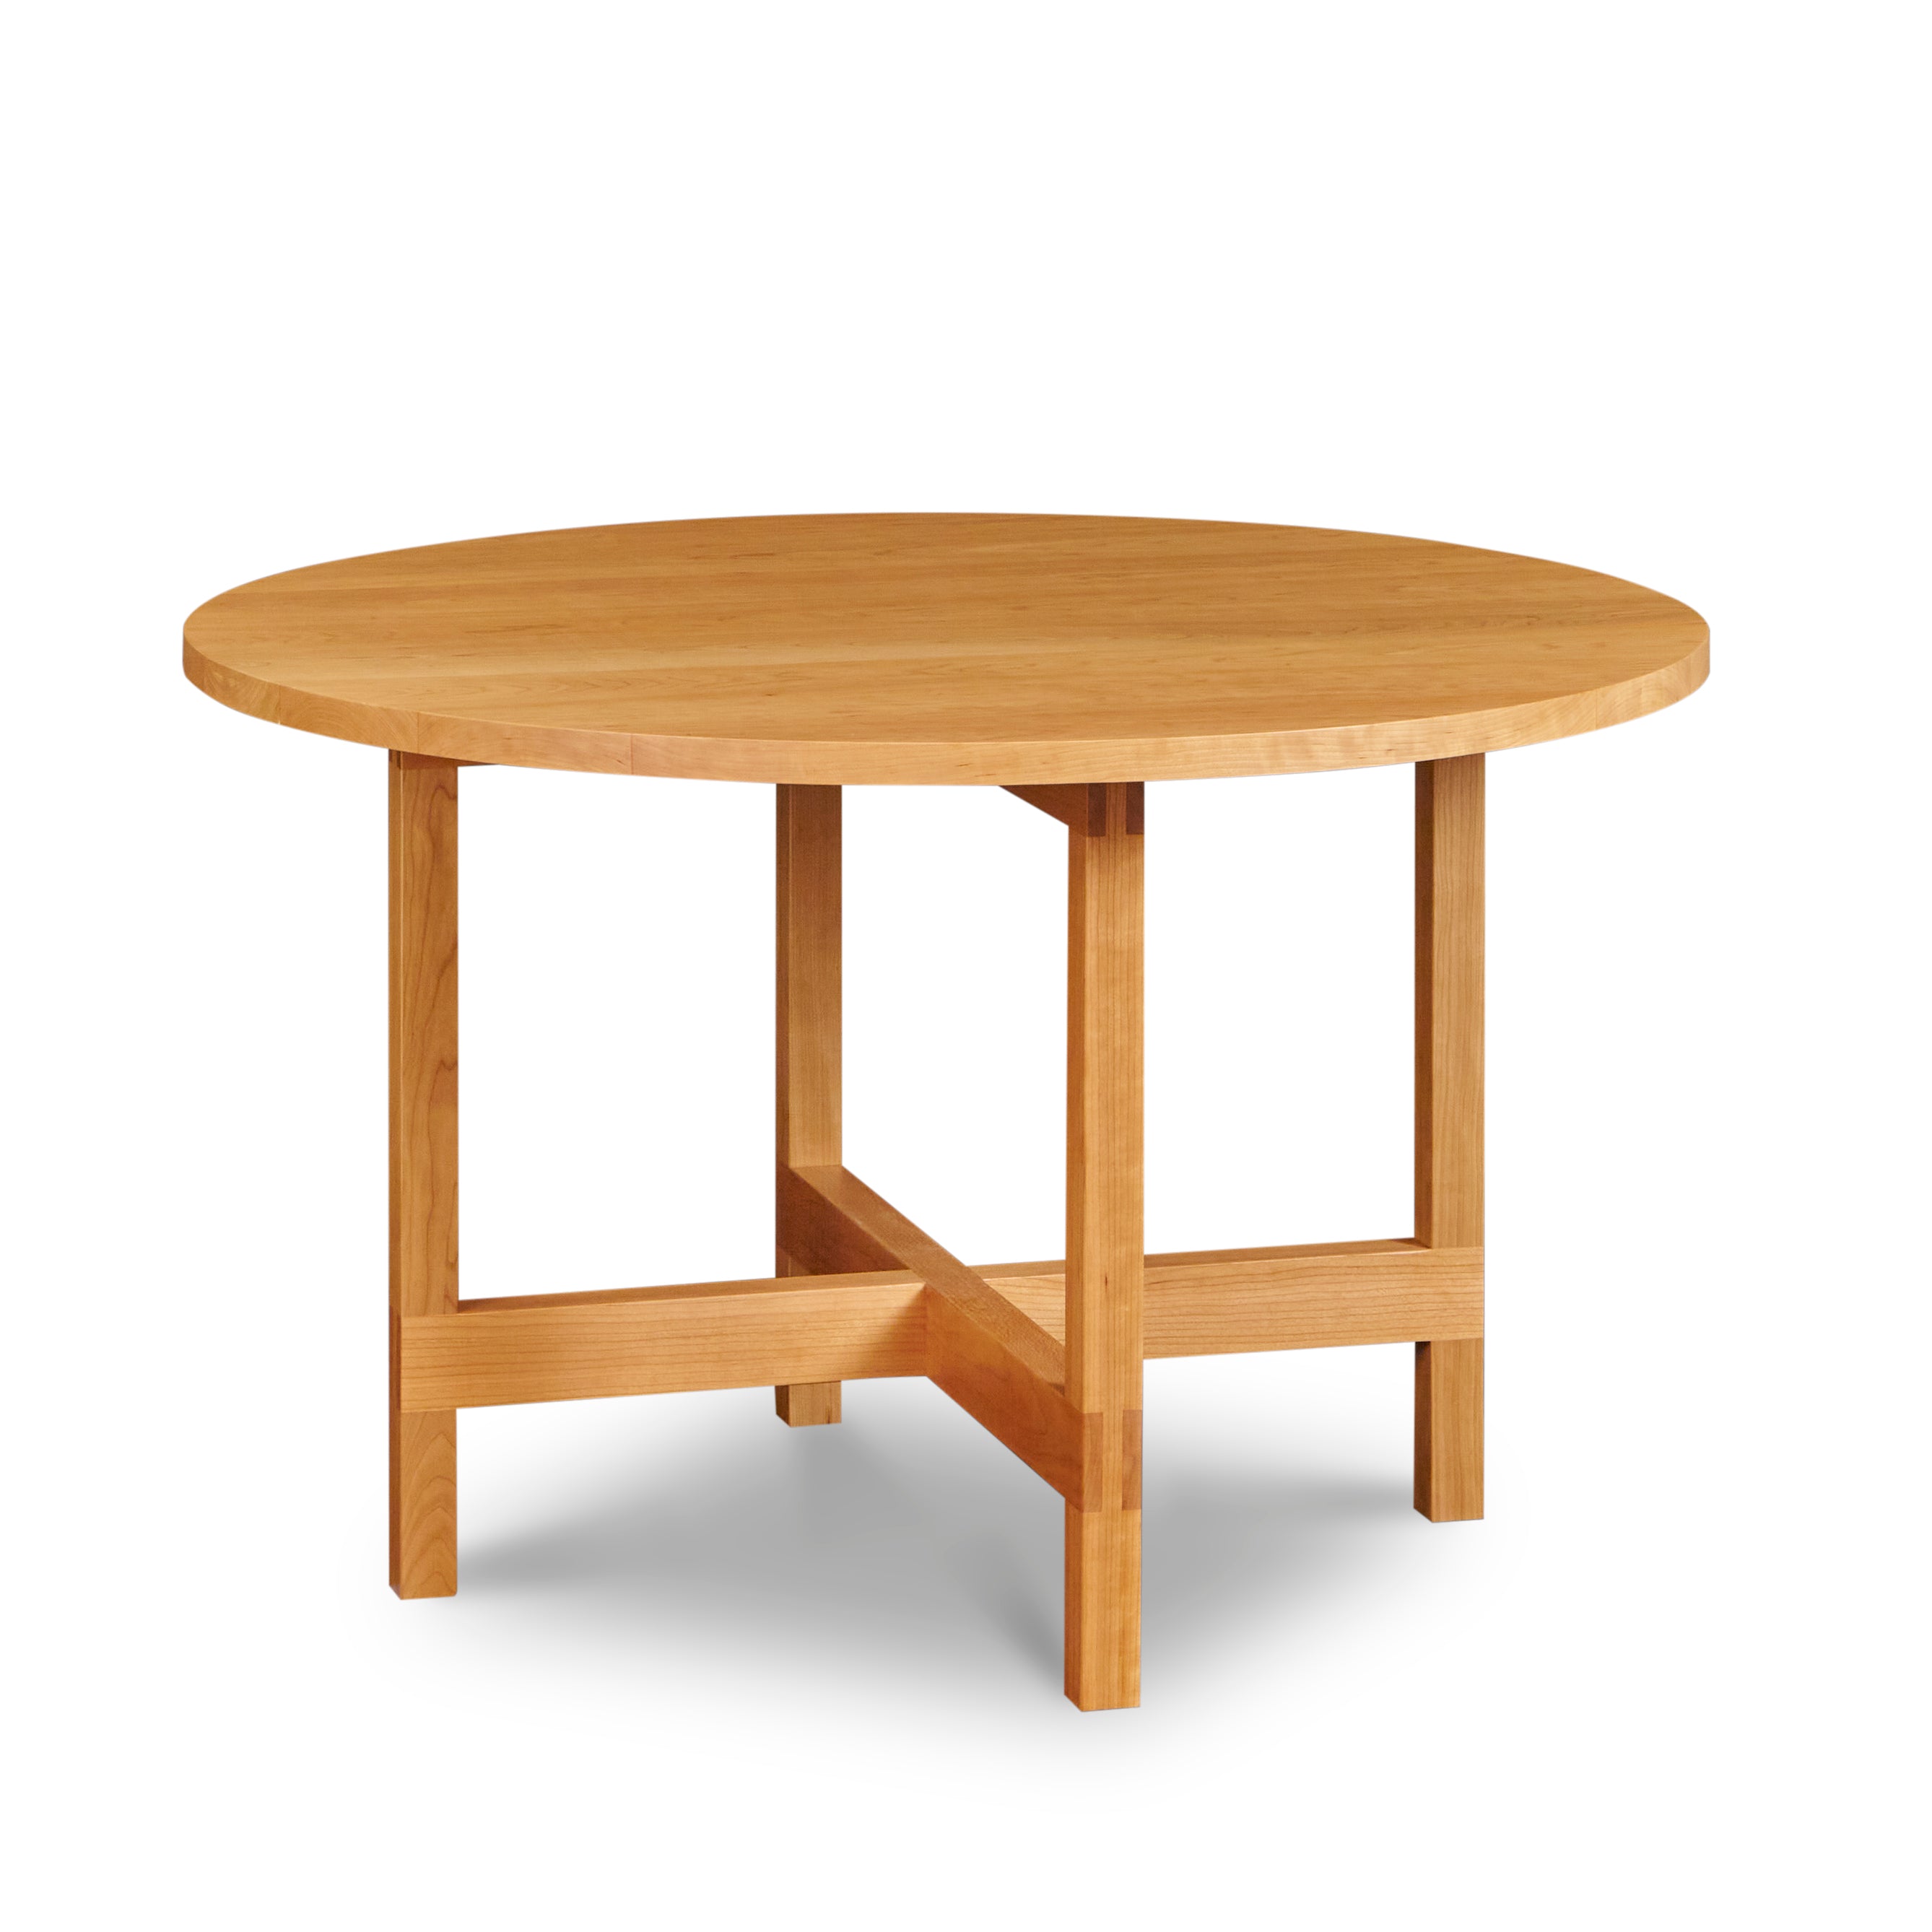 Modern round trestle table with visible joinery in cherry, from Maine's Chilton Furniture Co.